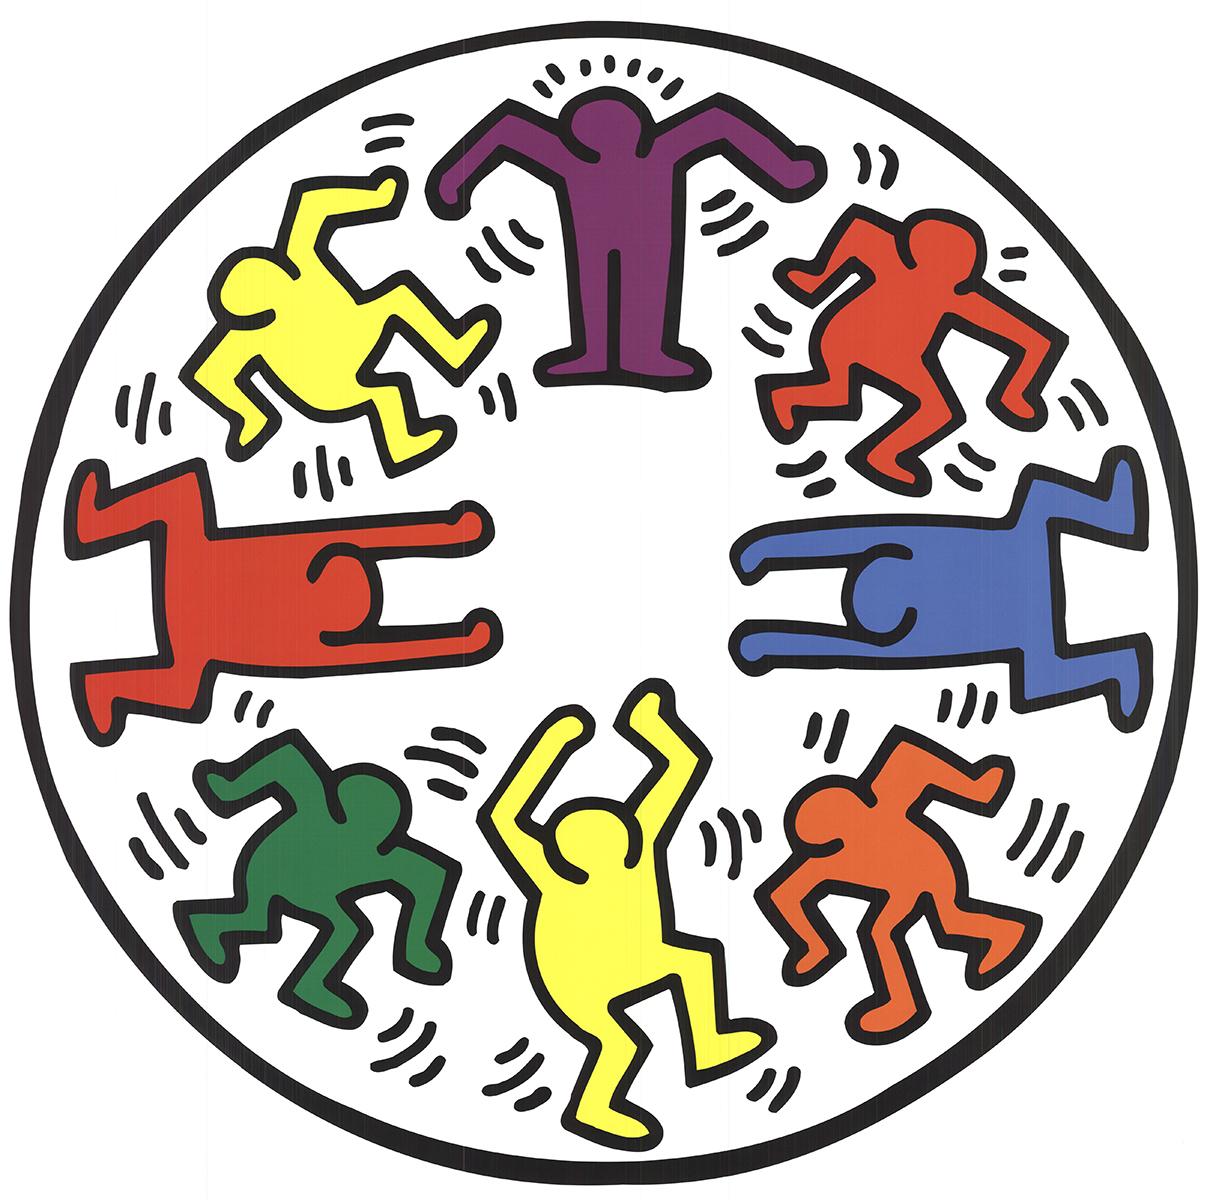 Keith Haring 'Untitled, 1986' 2007- Offset Lithograph For Sale 3